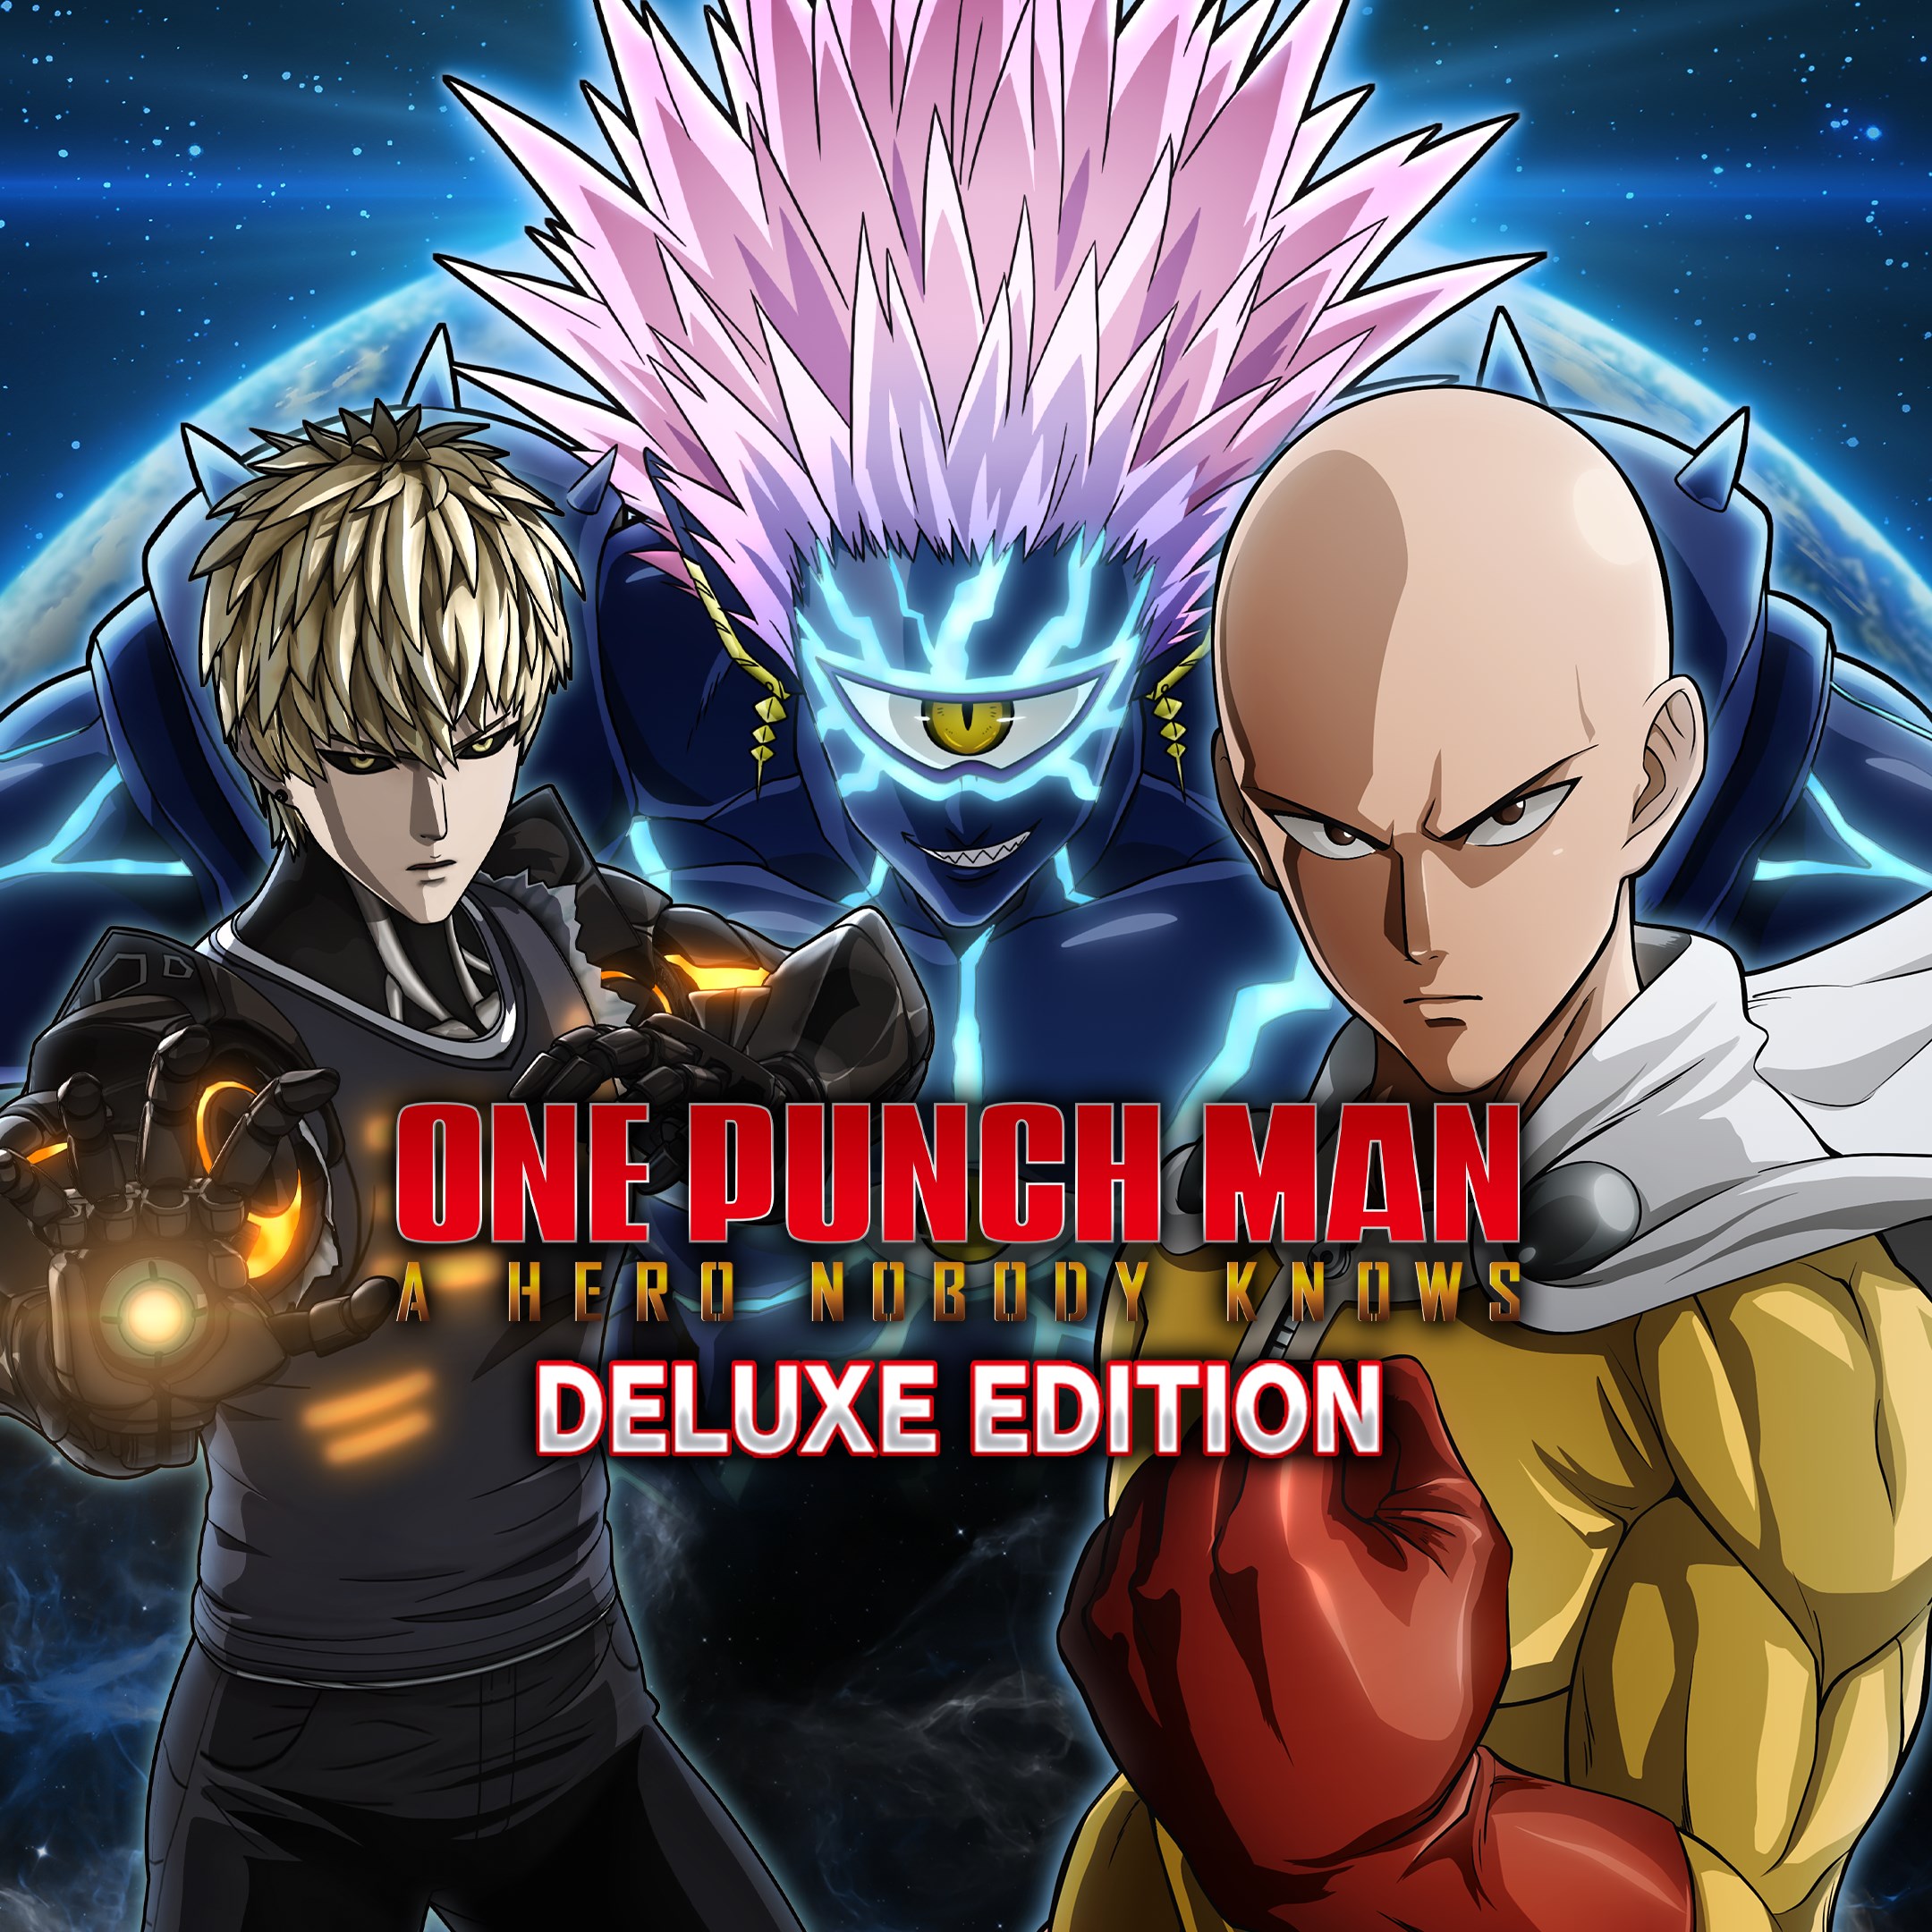 Précommande ONE PUNCH MAN: A HERO NOBODY KNOWS Deluxe Edition